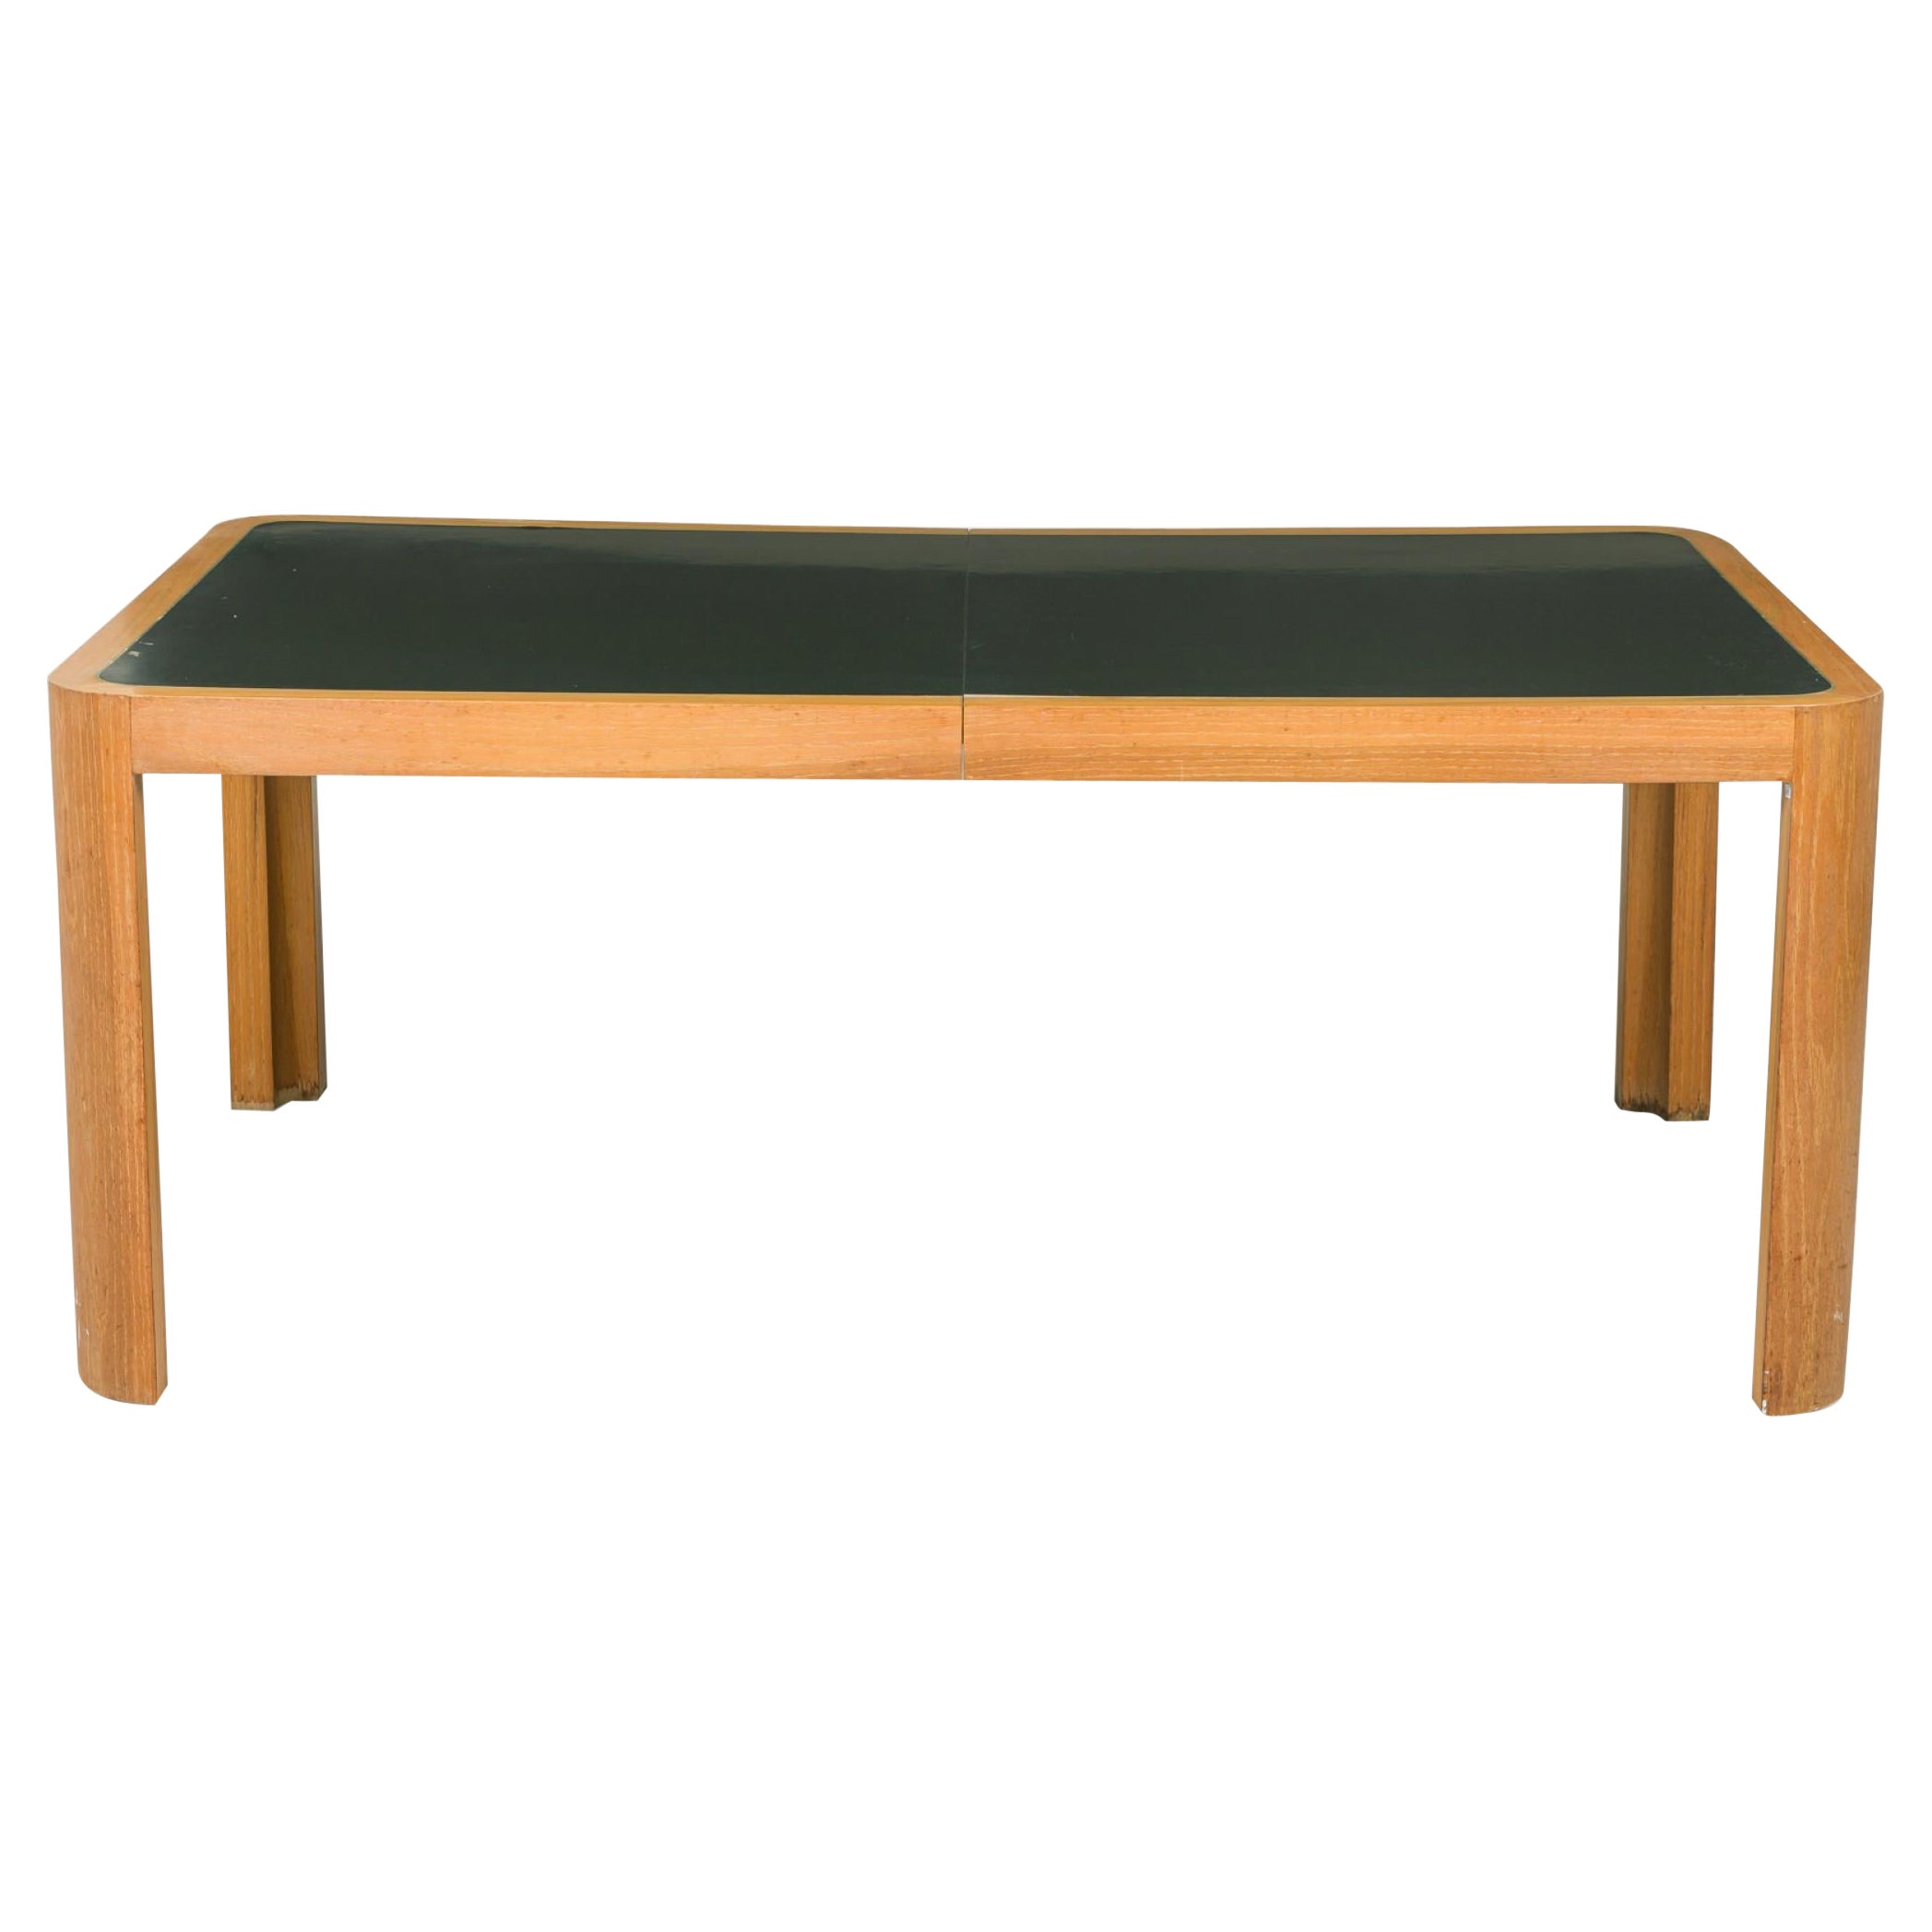 Vladimir Kagan Modern Green Formica and Blond Wood Veneer Extension Dining Table For Sale